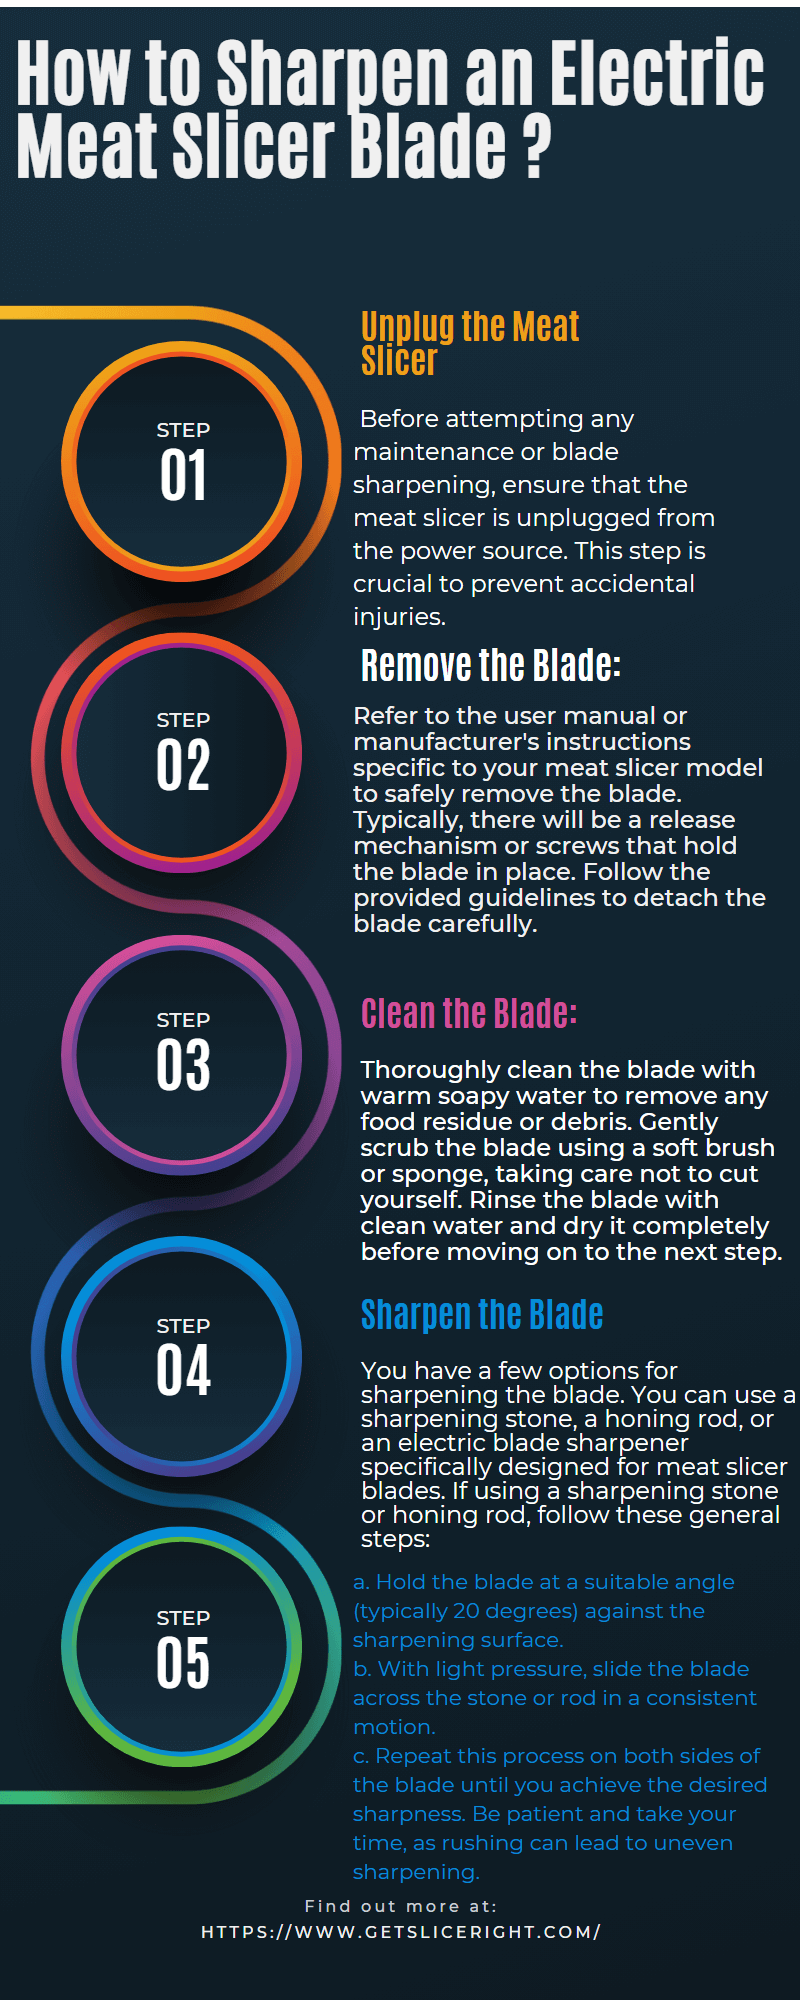 How to sharpen an Electric meat slicer blade - Getsliceright Infographic